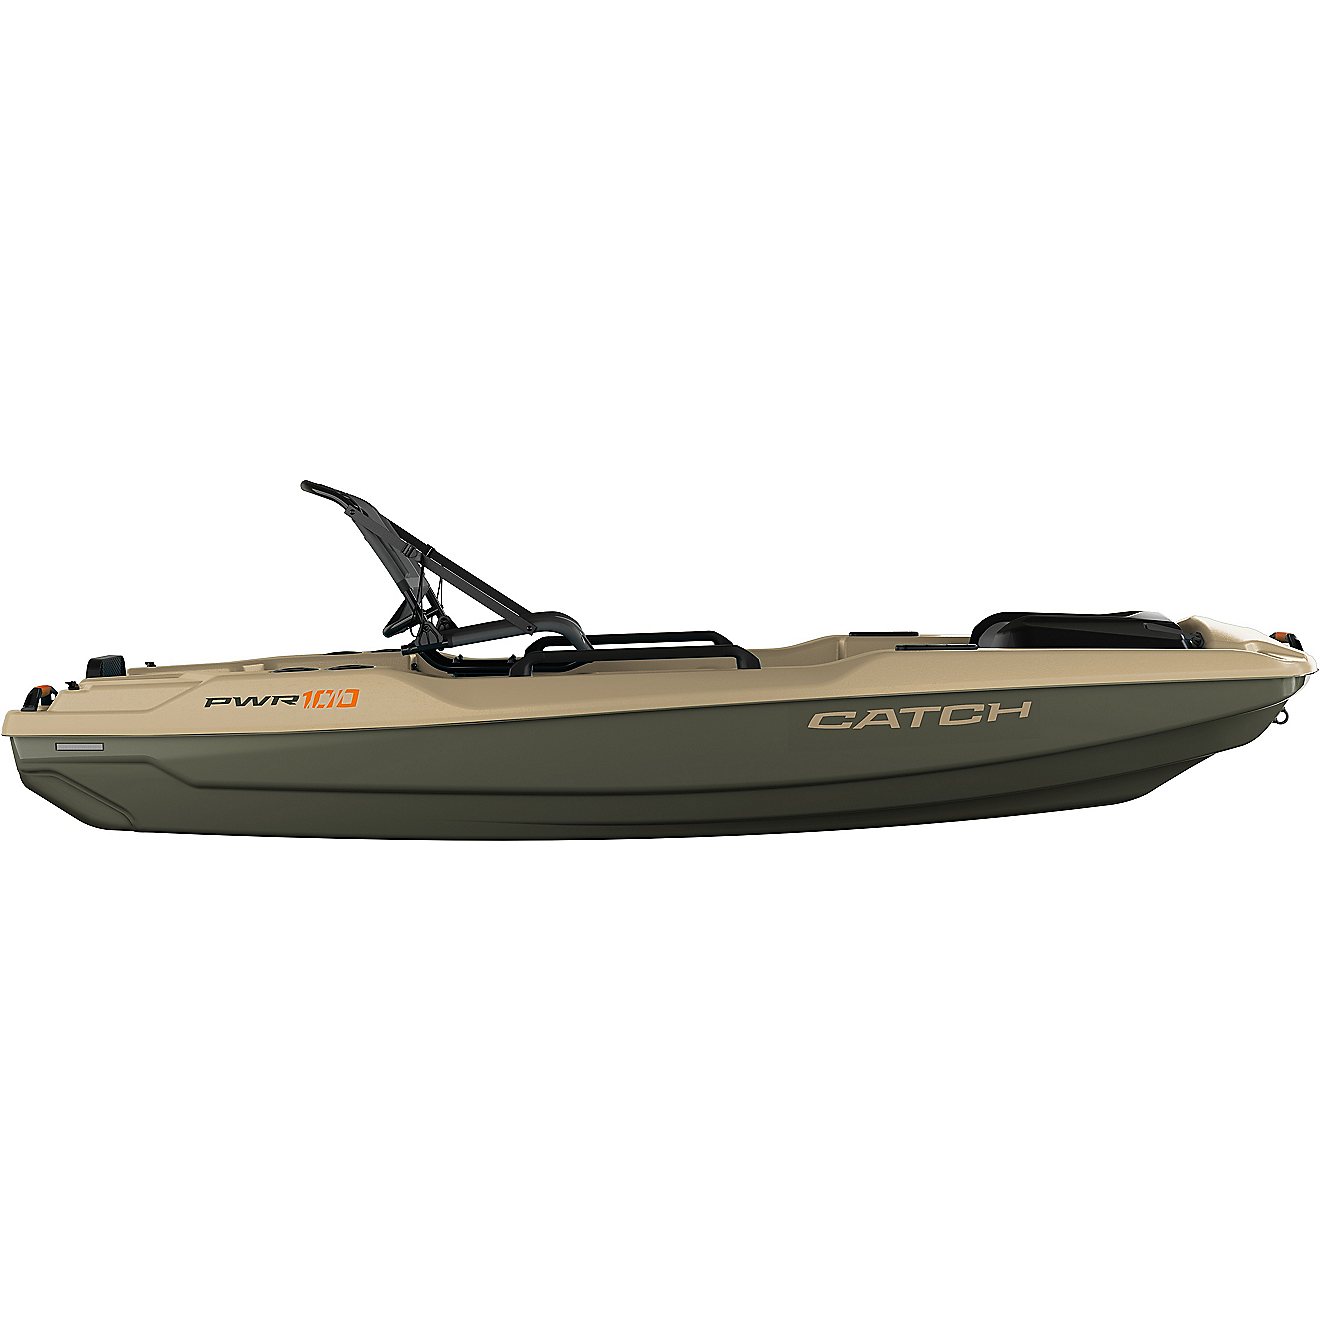 Pelican Catch PWR 100 9 ft 9 in Motor-Ready Fishing Kayak                                                                        - view number 2